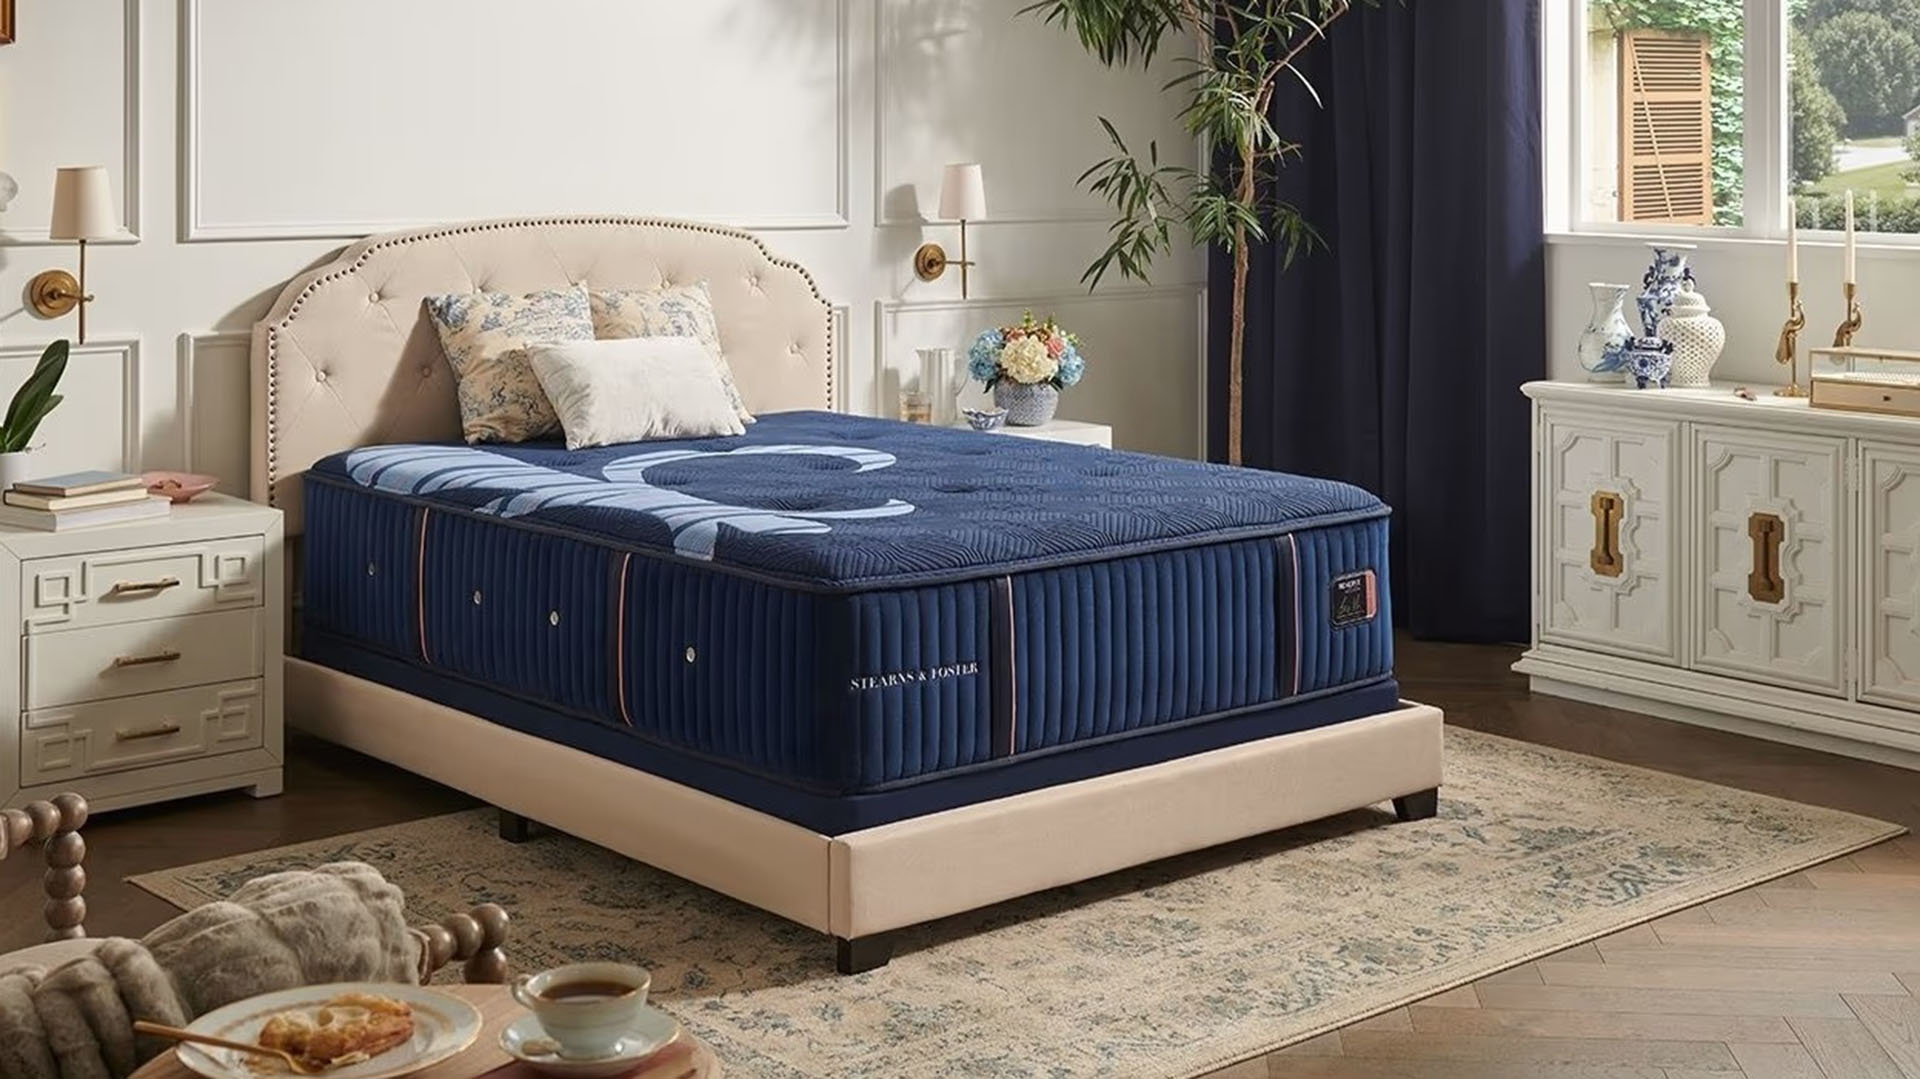 Stearns & Foster mattresses in West Hartford are designed with comfort and support in mind.